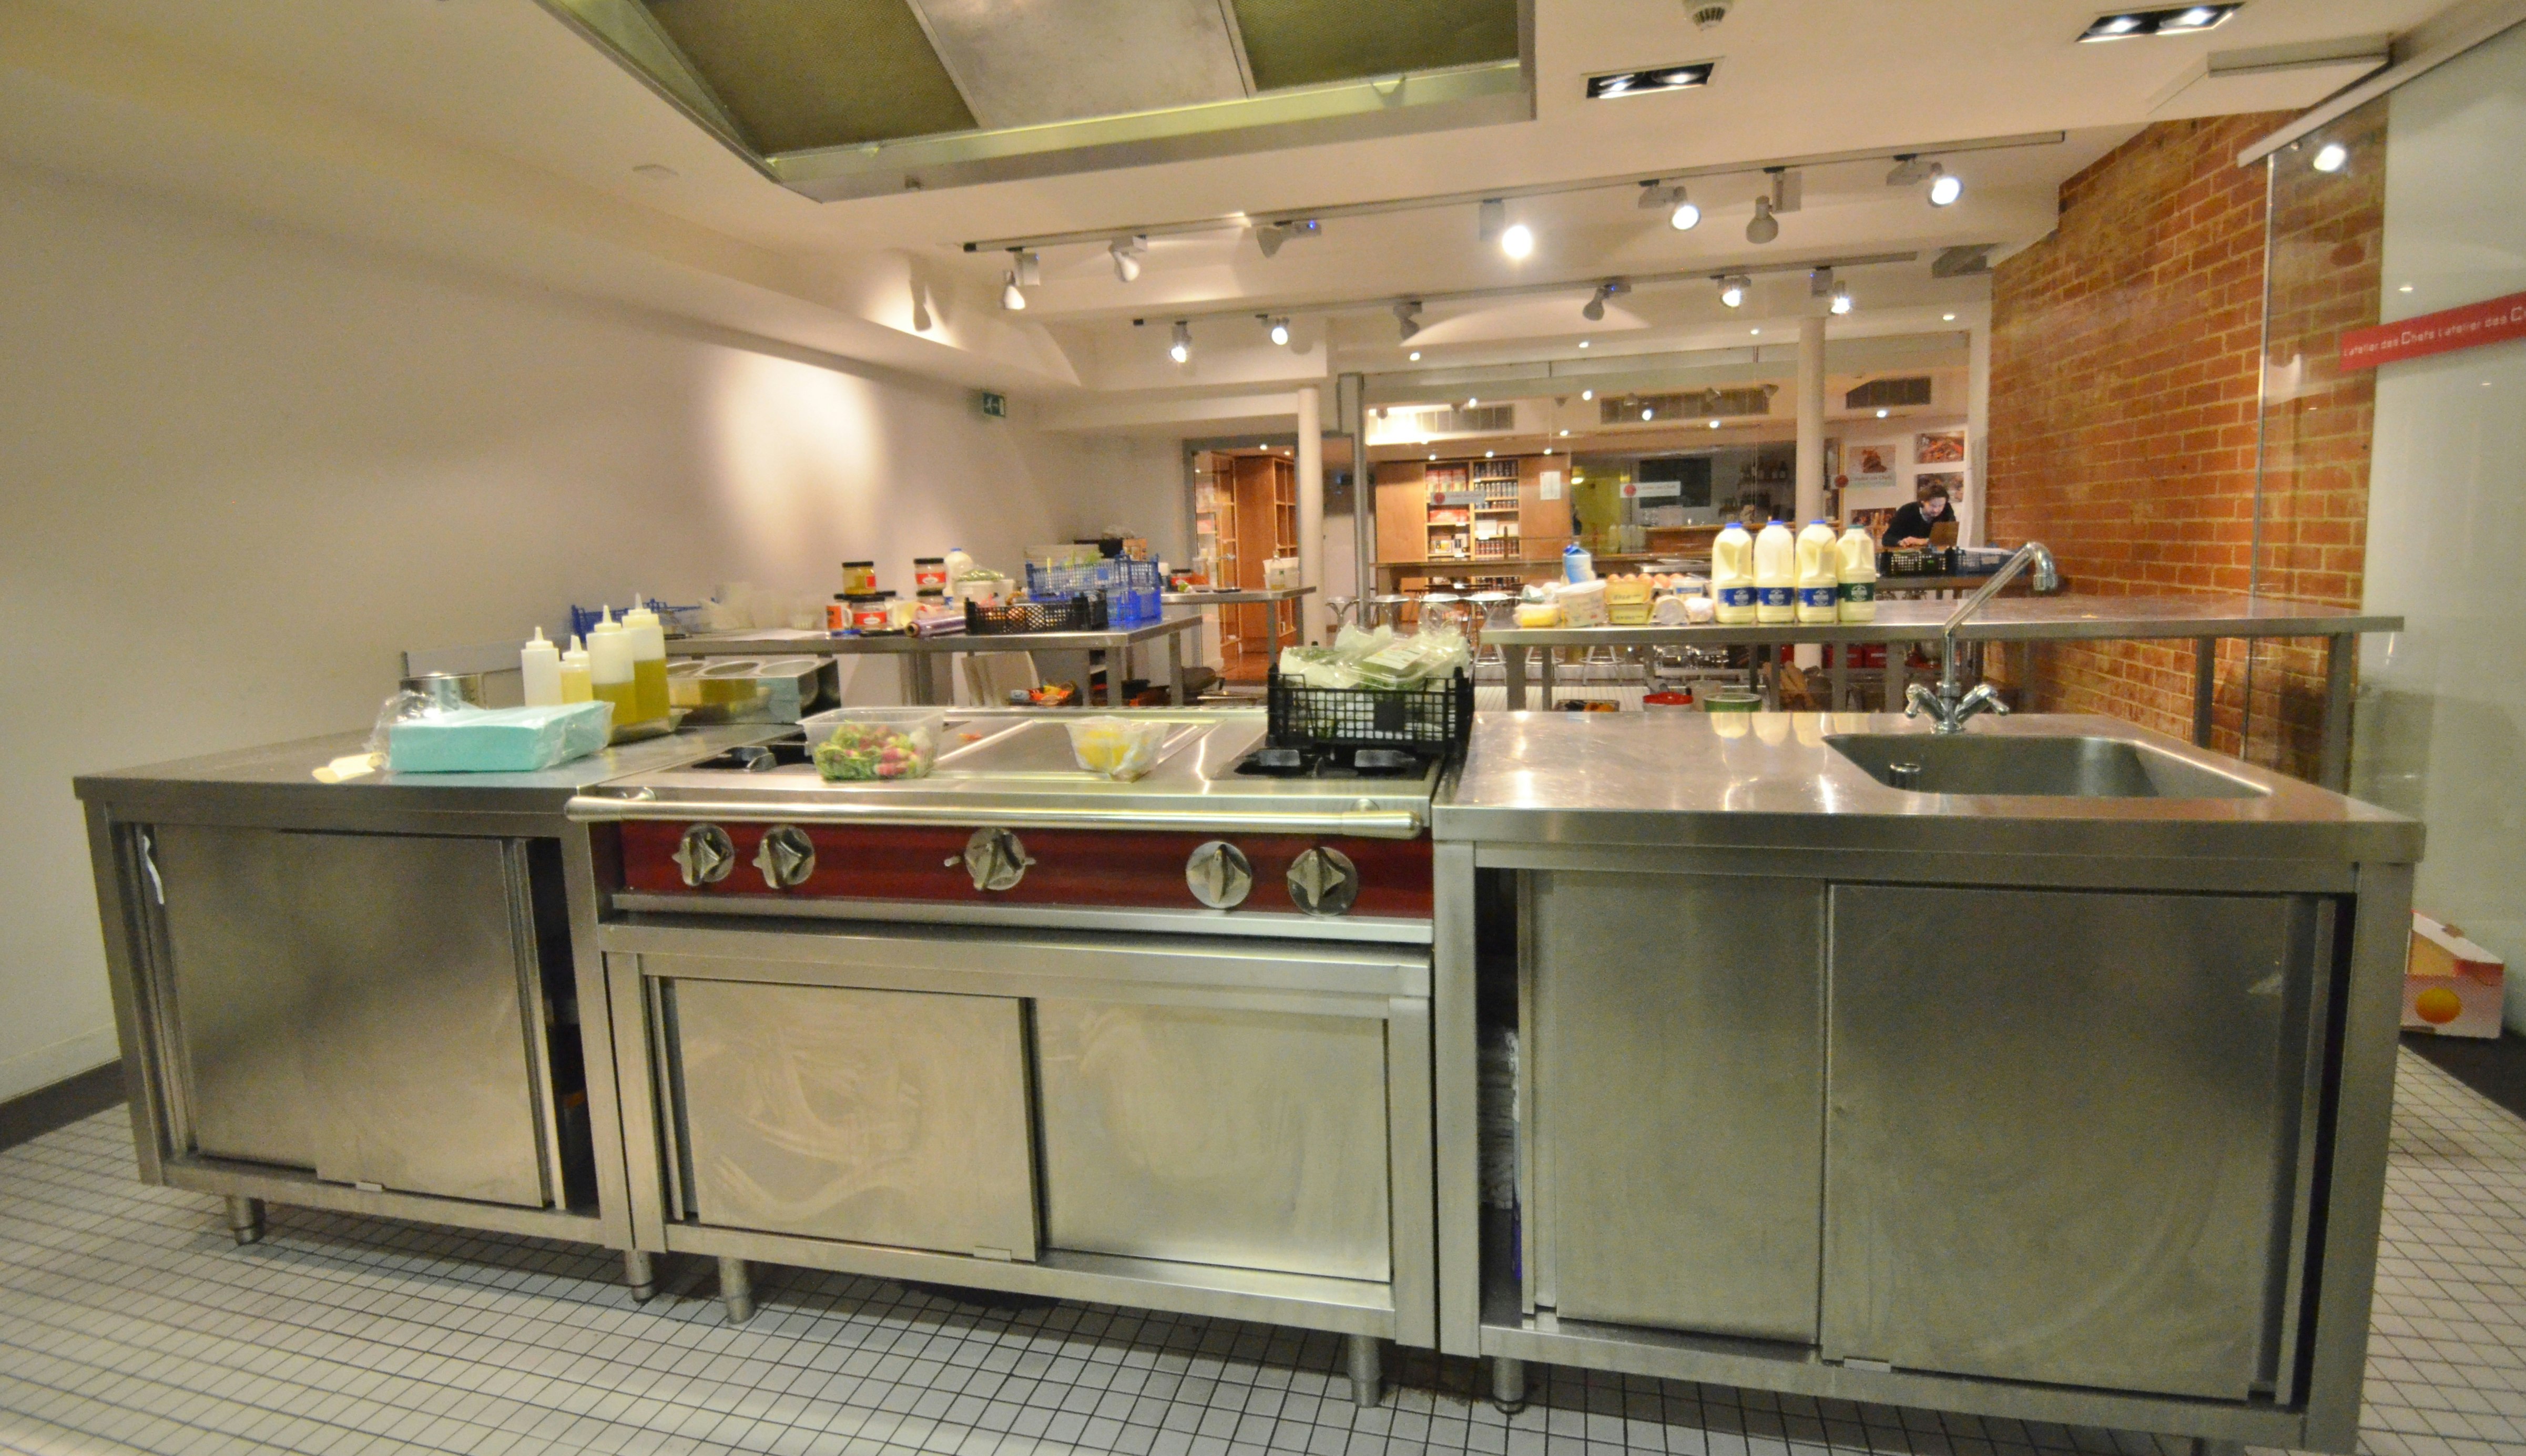 Kitchenes For Hire Venues in London - L'atelier des Chefs Oxford Circus